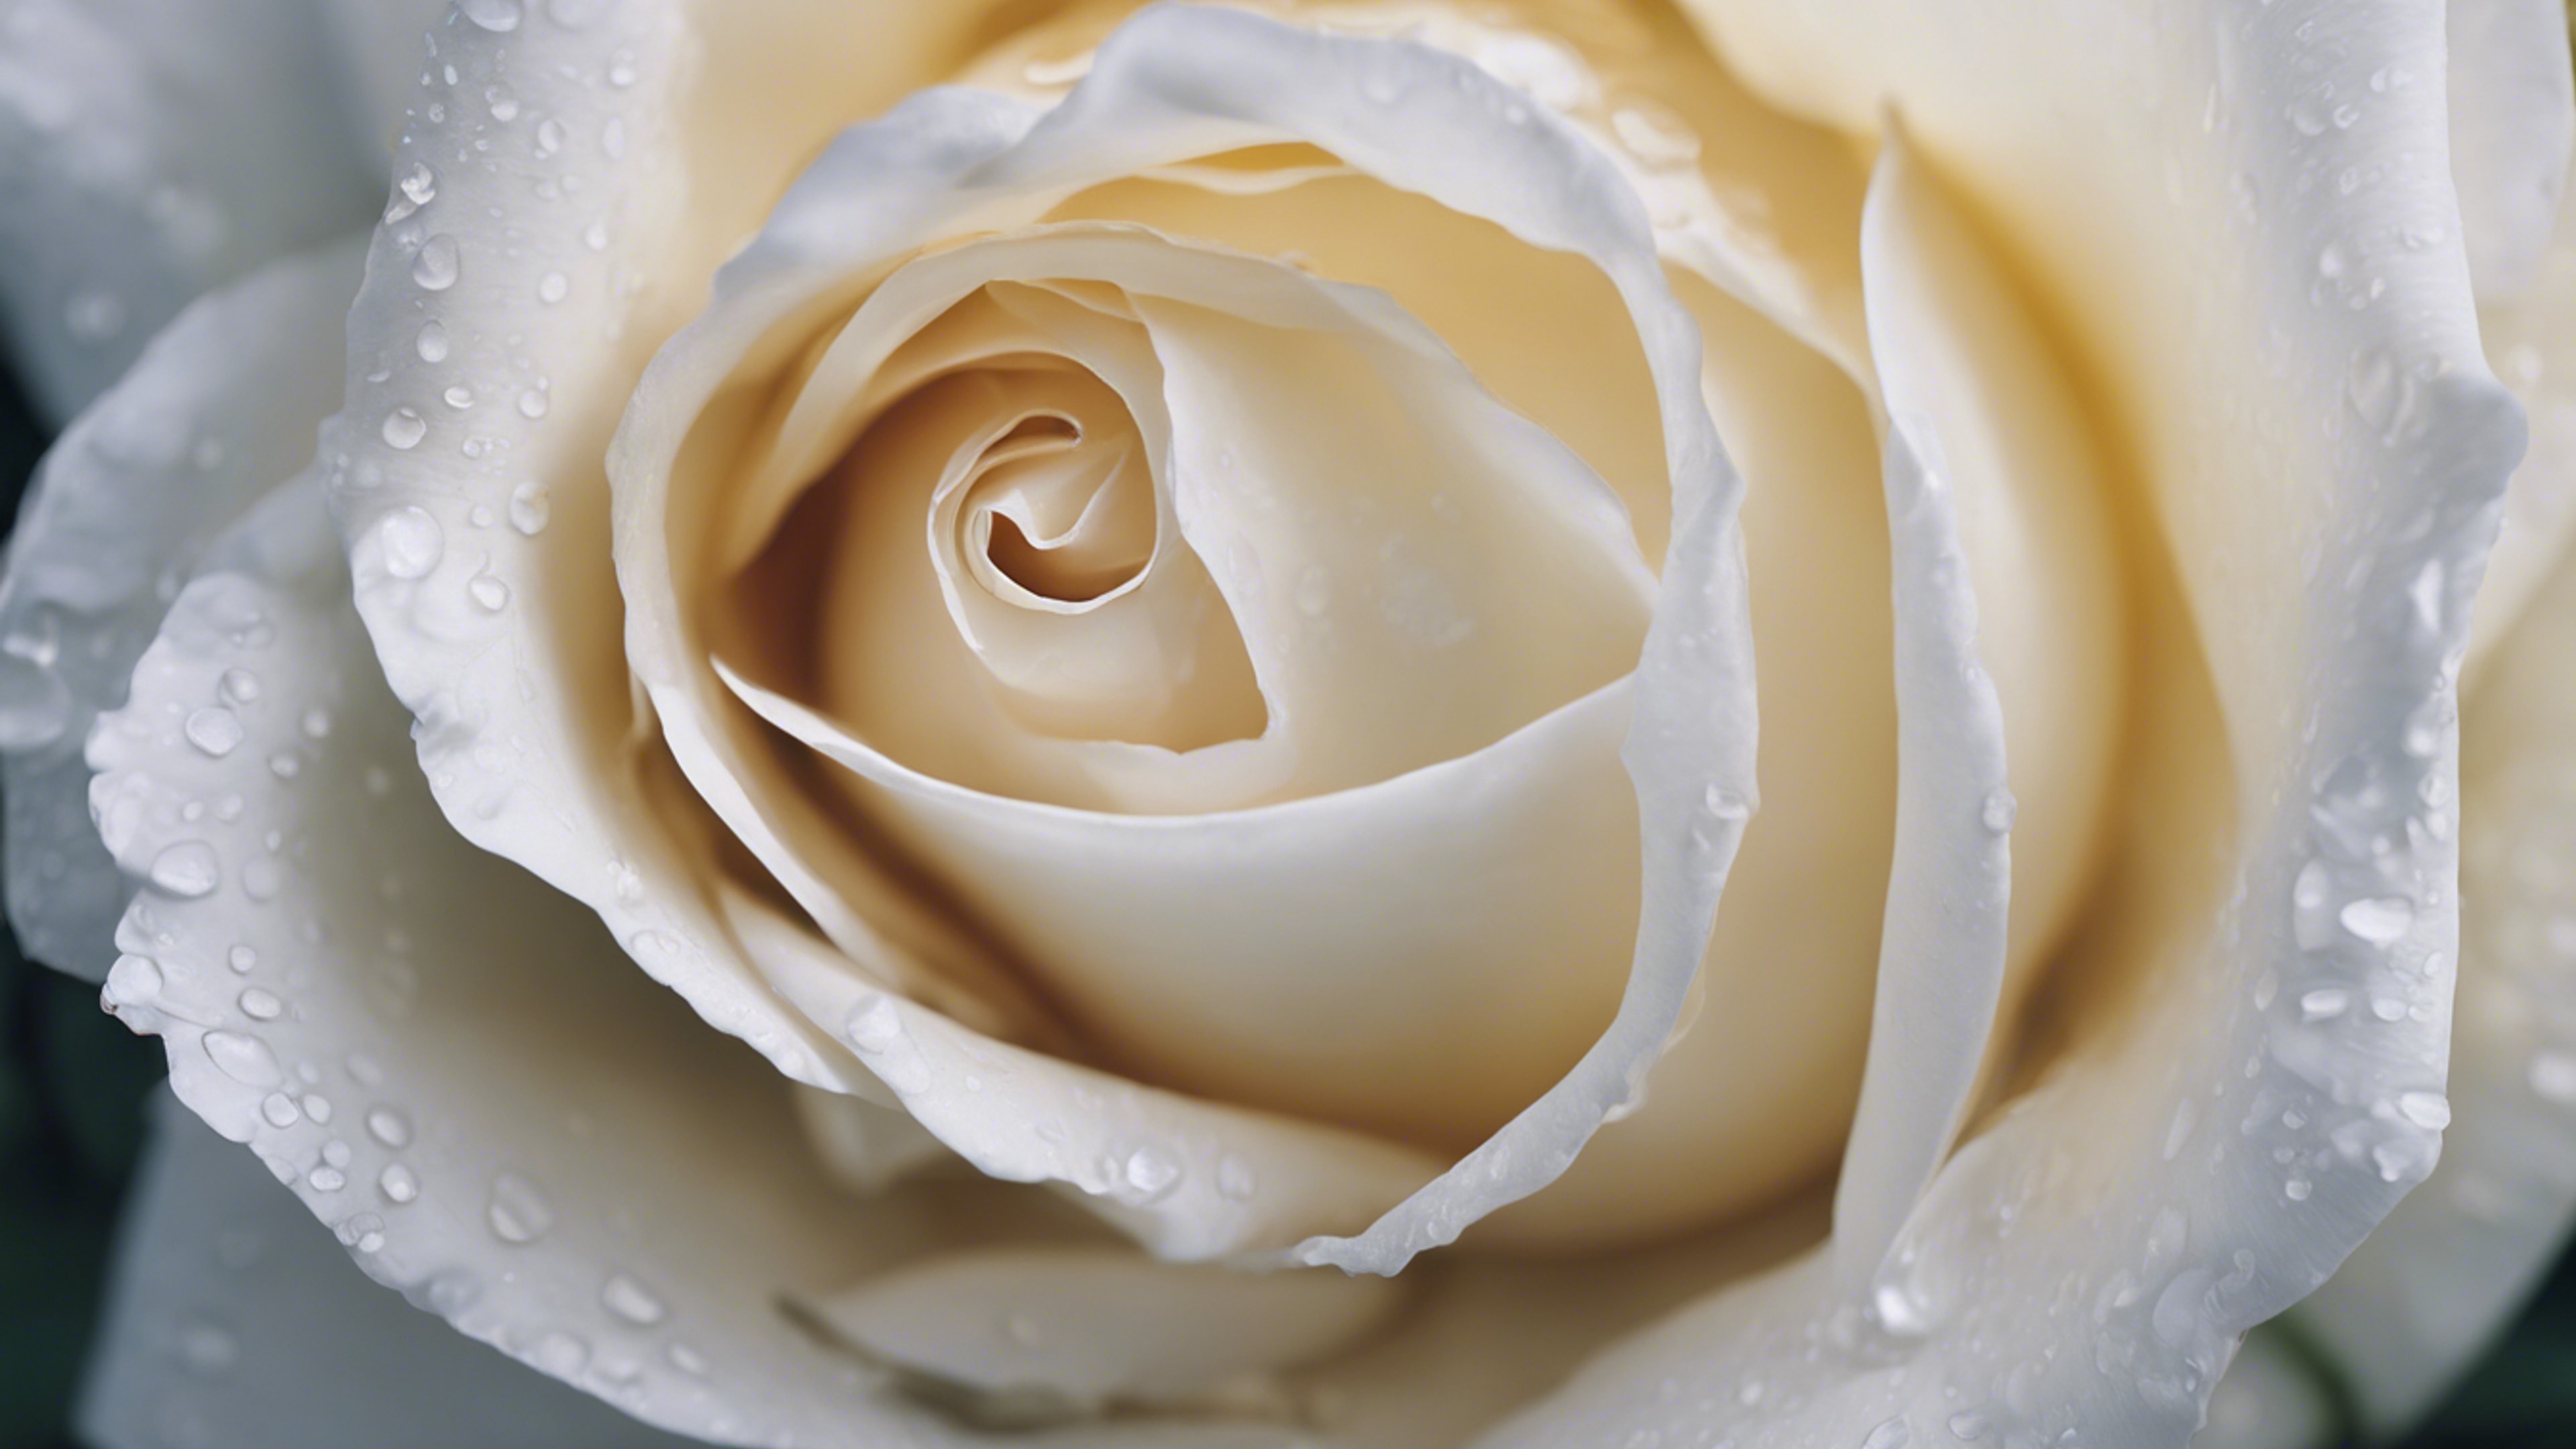 Zoomed view of the velvety petals of a white rose. Hintergrund[9ebd1bf4e1a74c36ba13]